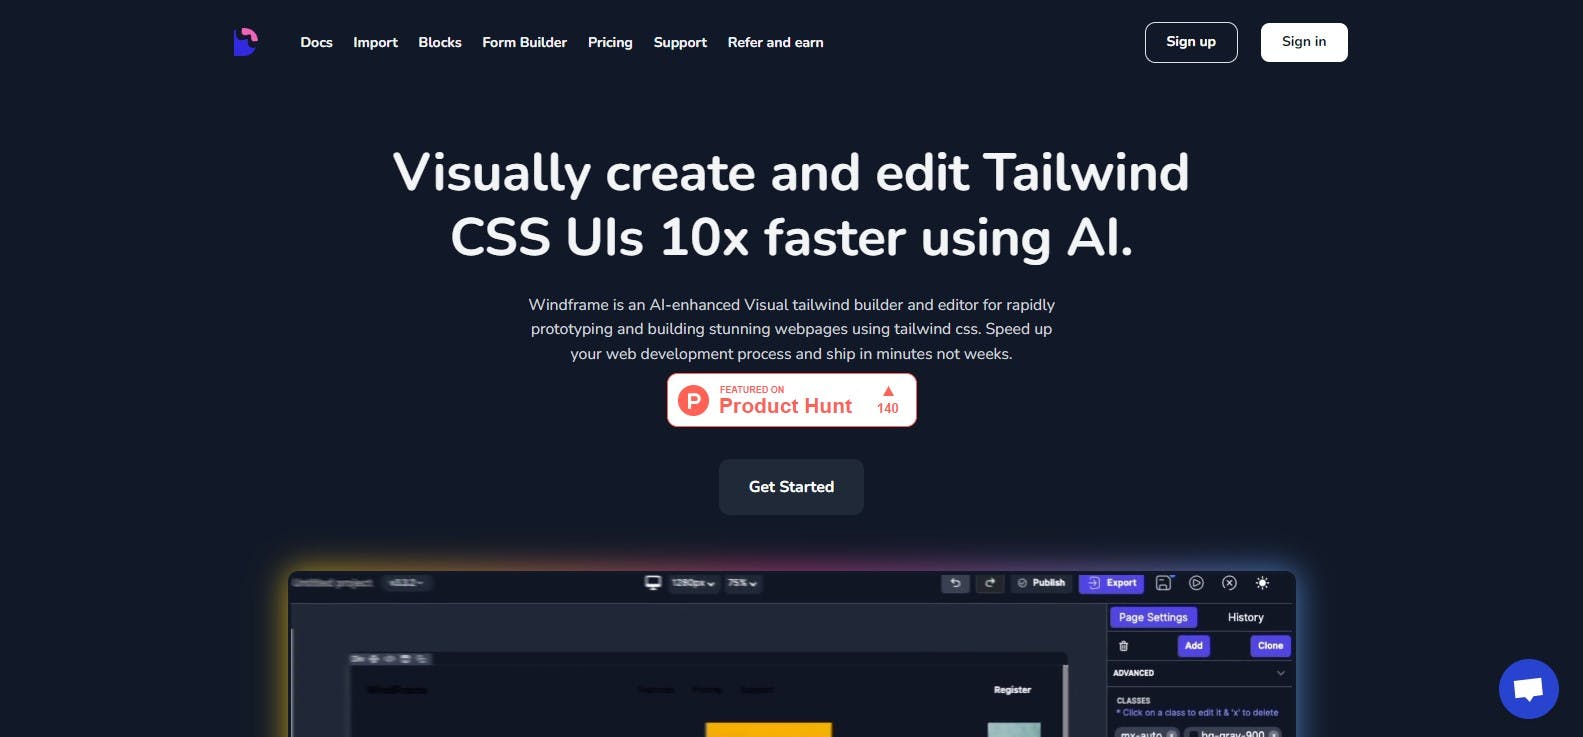 Visually create and edit Tailwind CSS